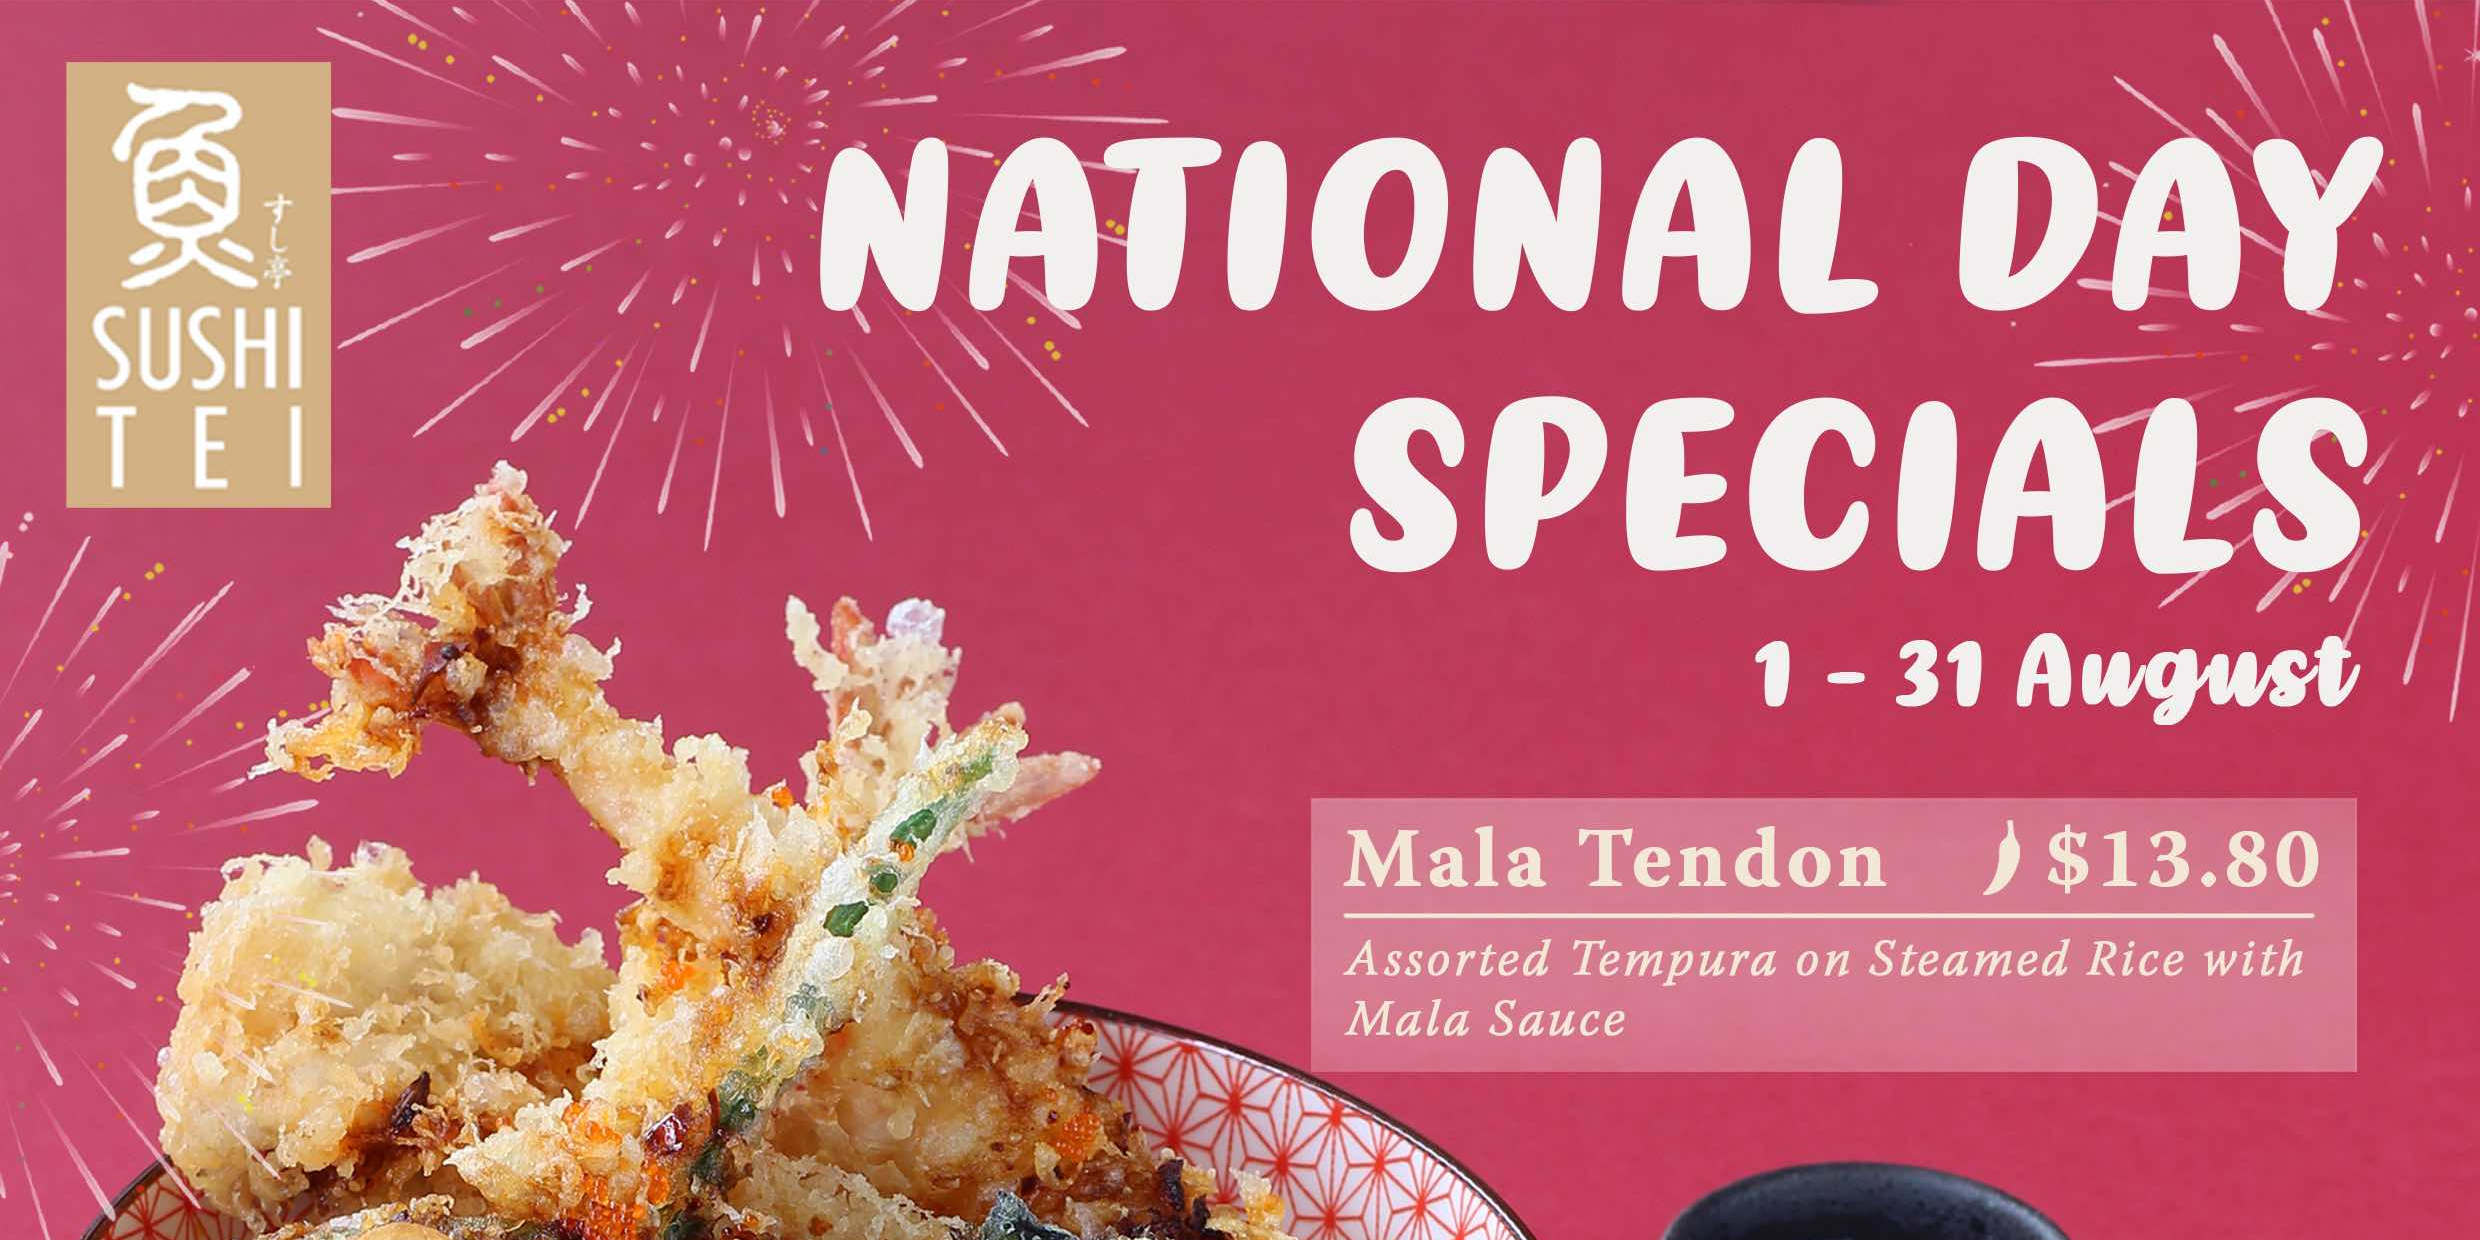 Two Locally-inspired Japanese Creations by Sushi Tei this National Day from $7.80 onwards